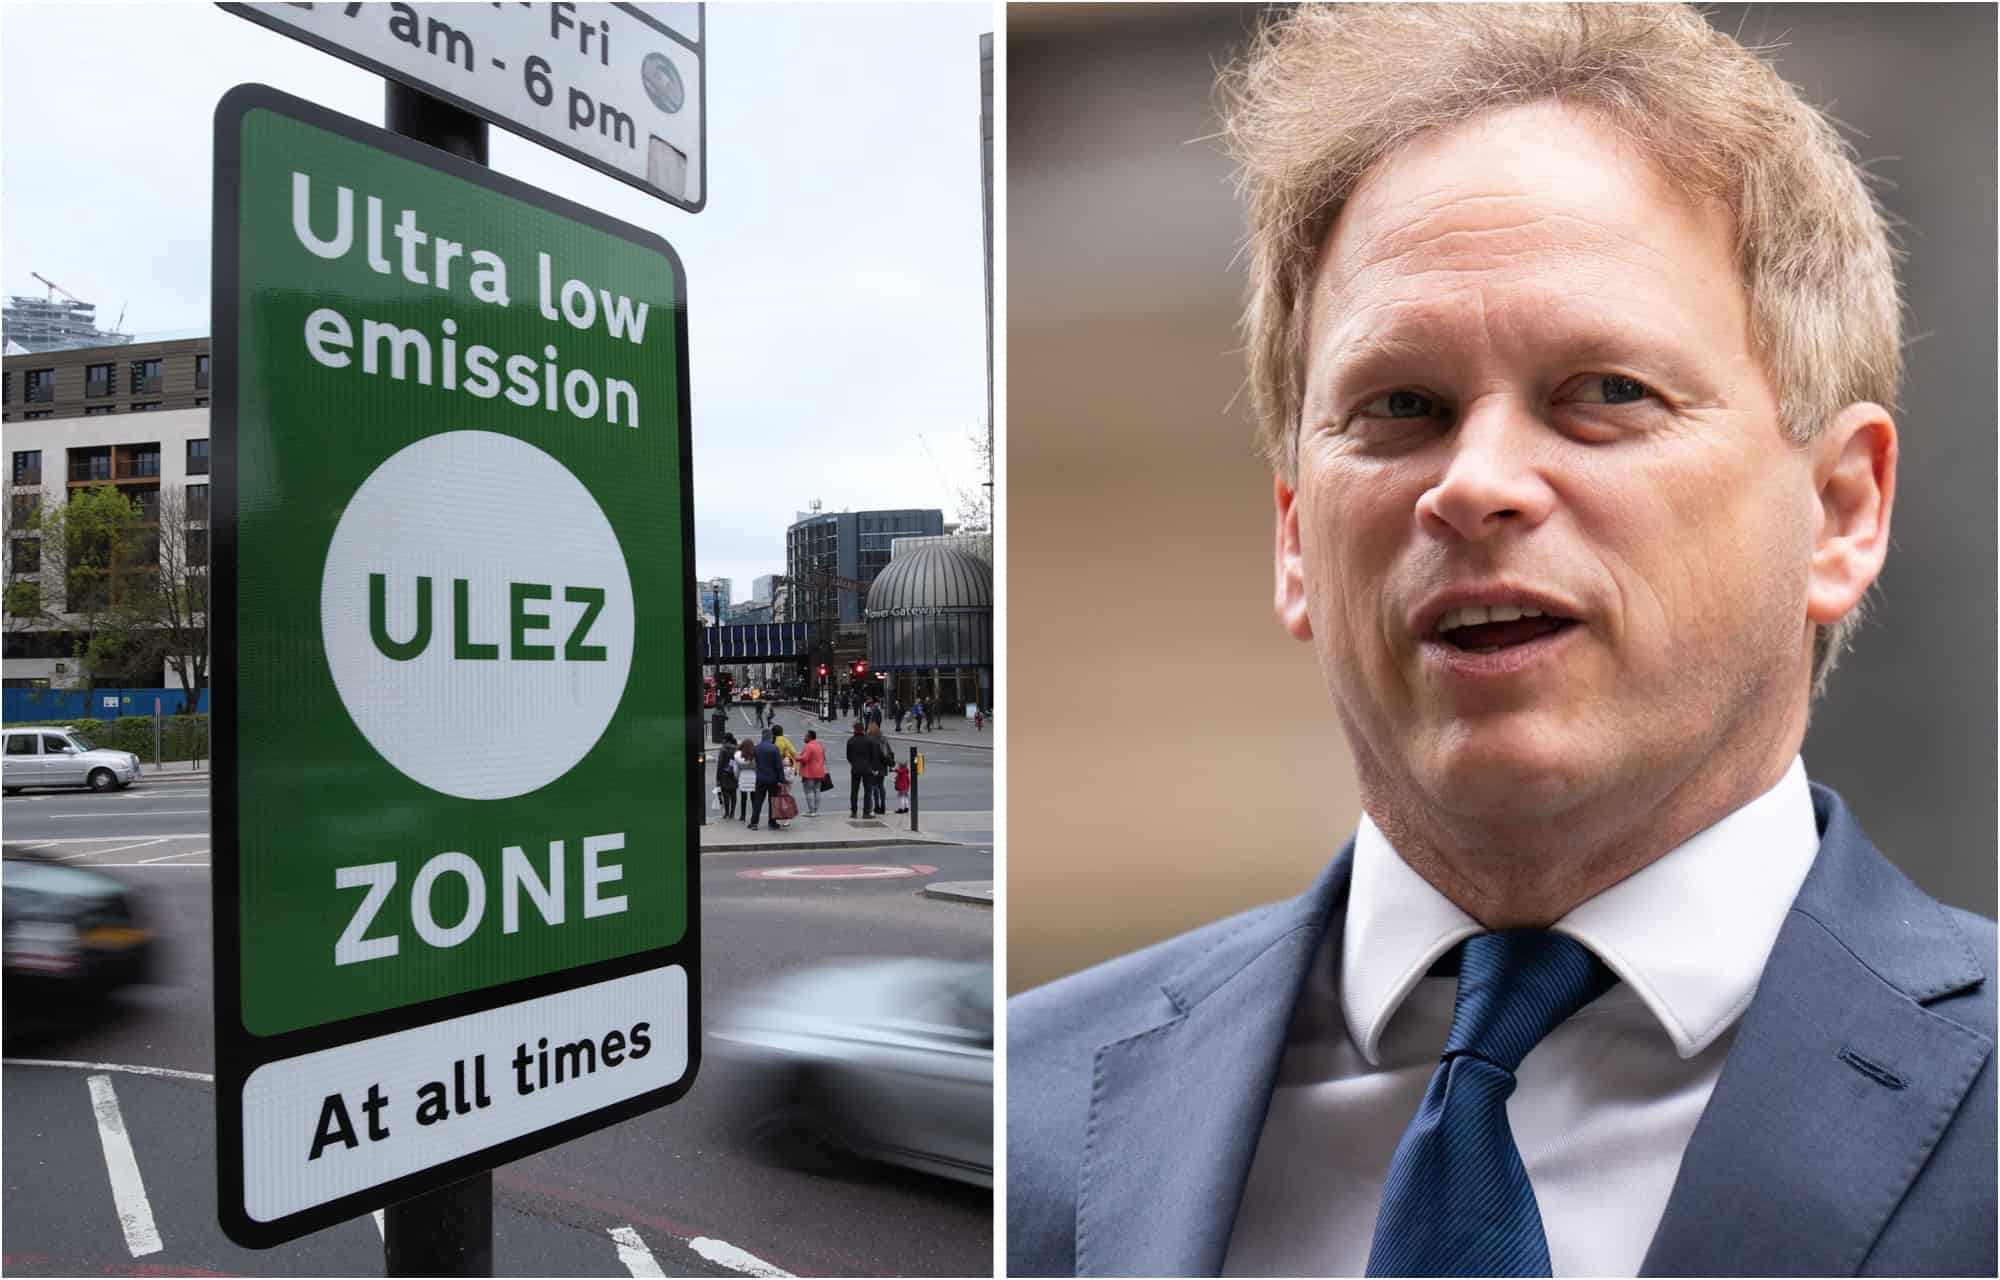 Leaked letter shows Govt urged Khan to expand ULEZ